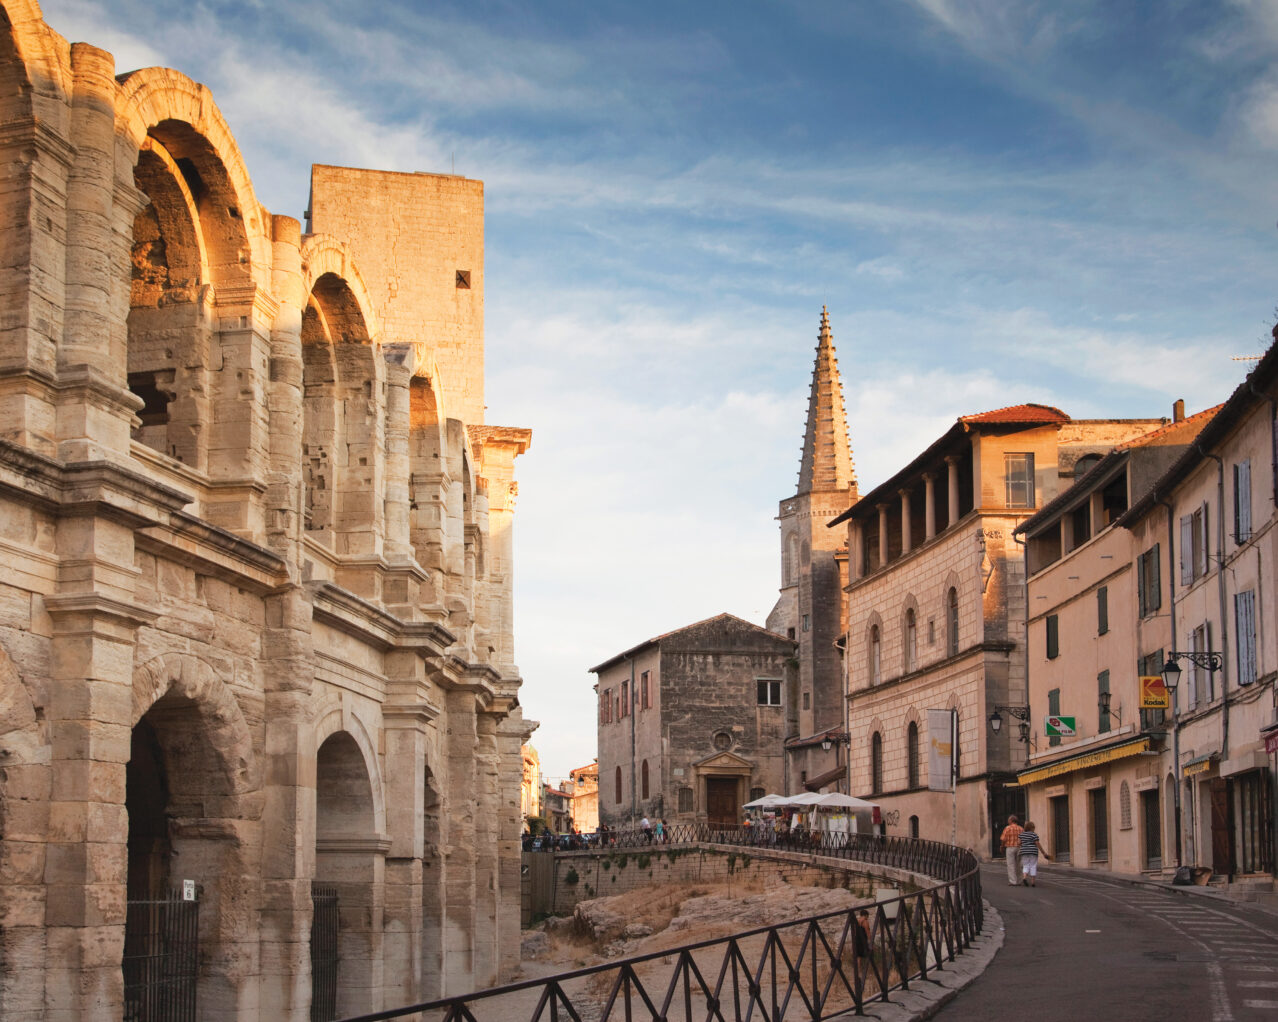 The cityscape of Arles